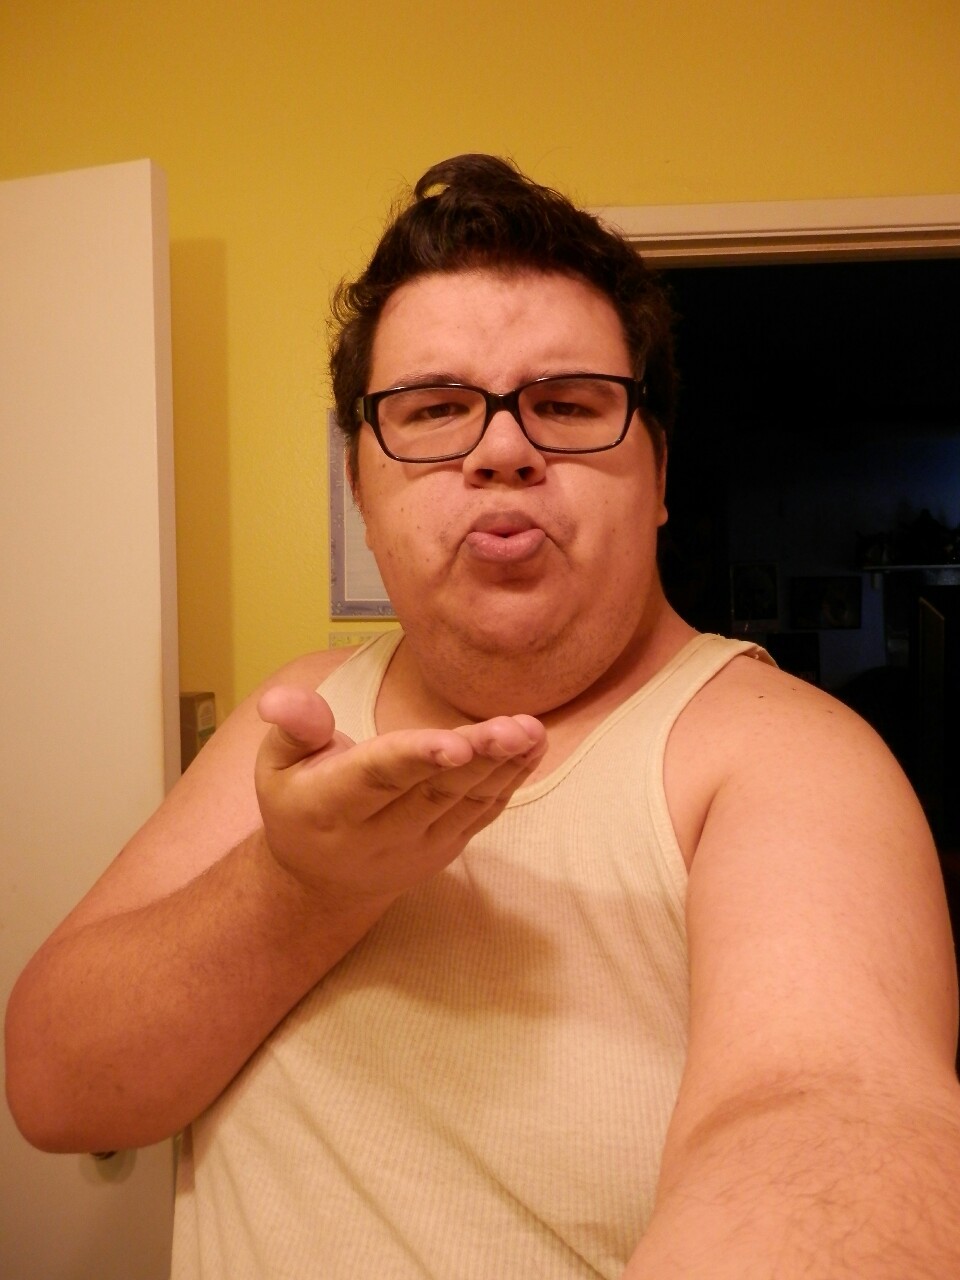 i-lust-you-chubs:  submission!!! sweet guy named Nick, vers, chubby, in California.